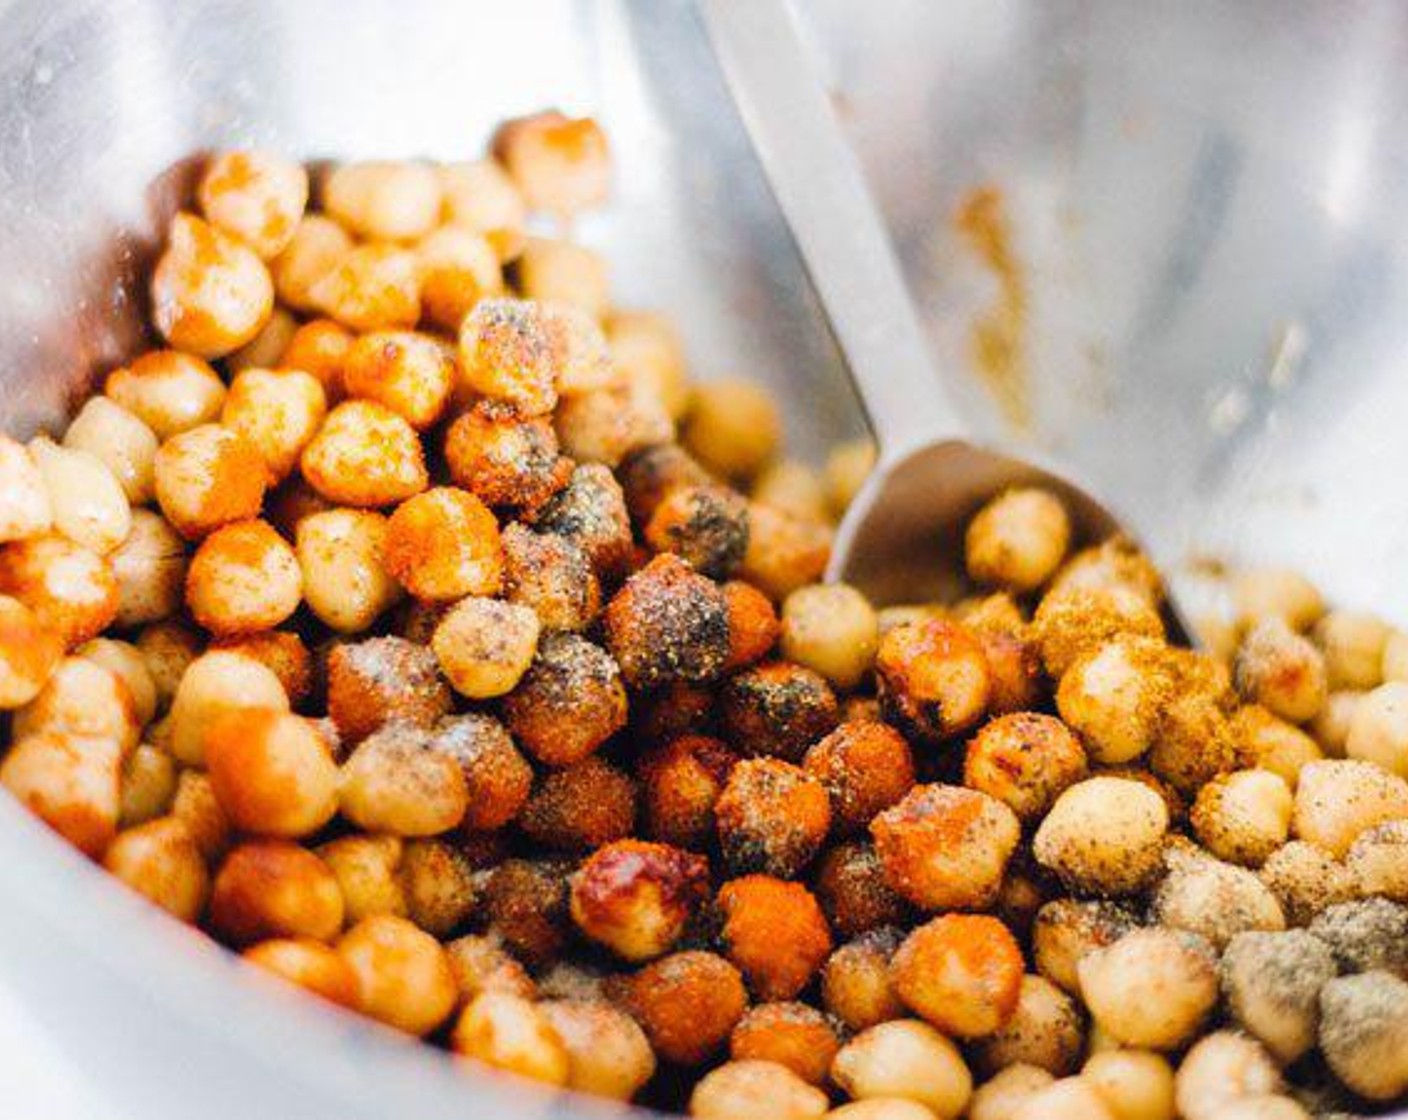 step 1 Pat dry Chickpeas (1 can) with paper towel, removing any skins that may come off. Gently toss them with Olive Oil (1 Tbsp), Paprika (1 Tbsp), Finely Ground Black Pepper (1/2 Tbsp), Cayenne Pepper (3/4 tsp) and Salt (3/4 tsp).